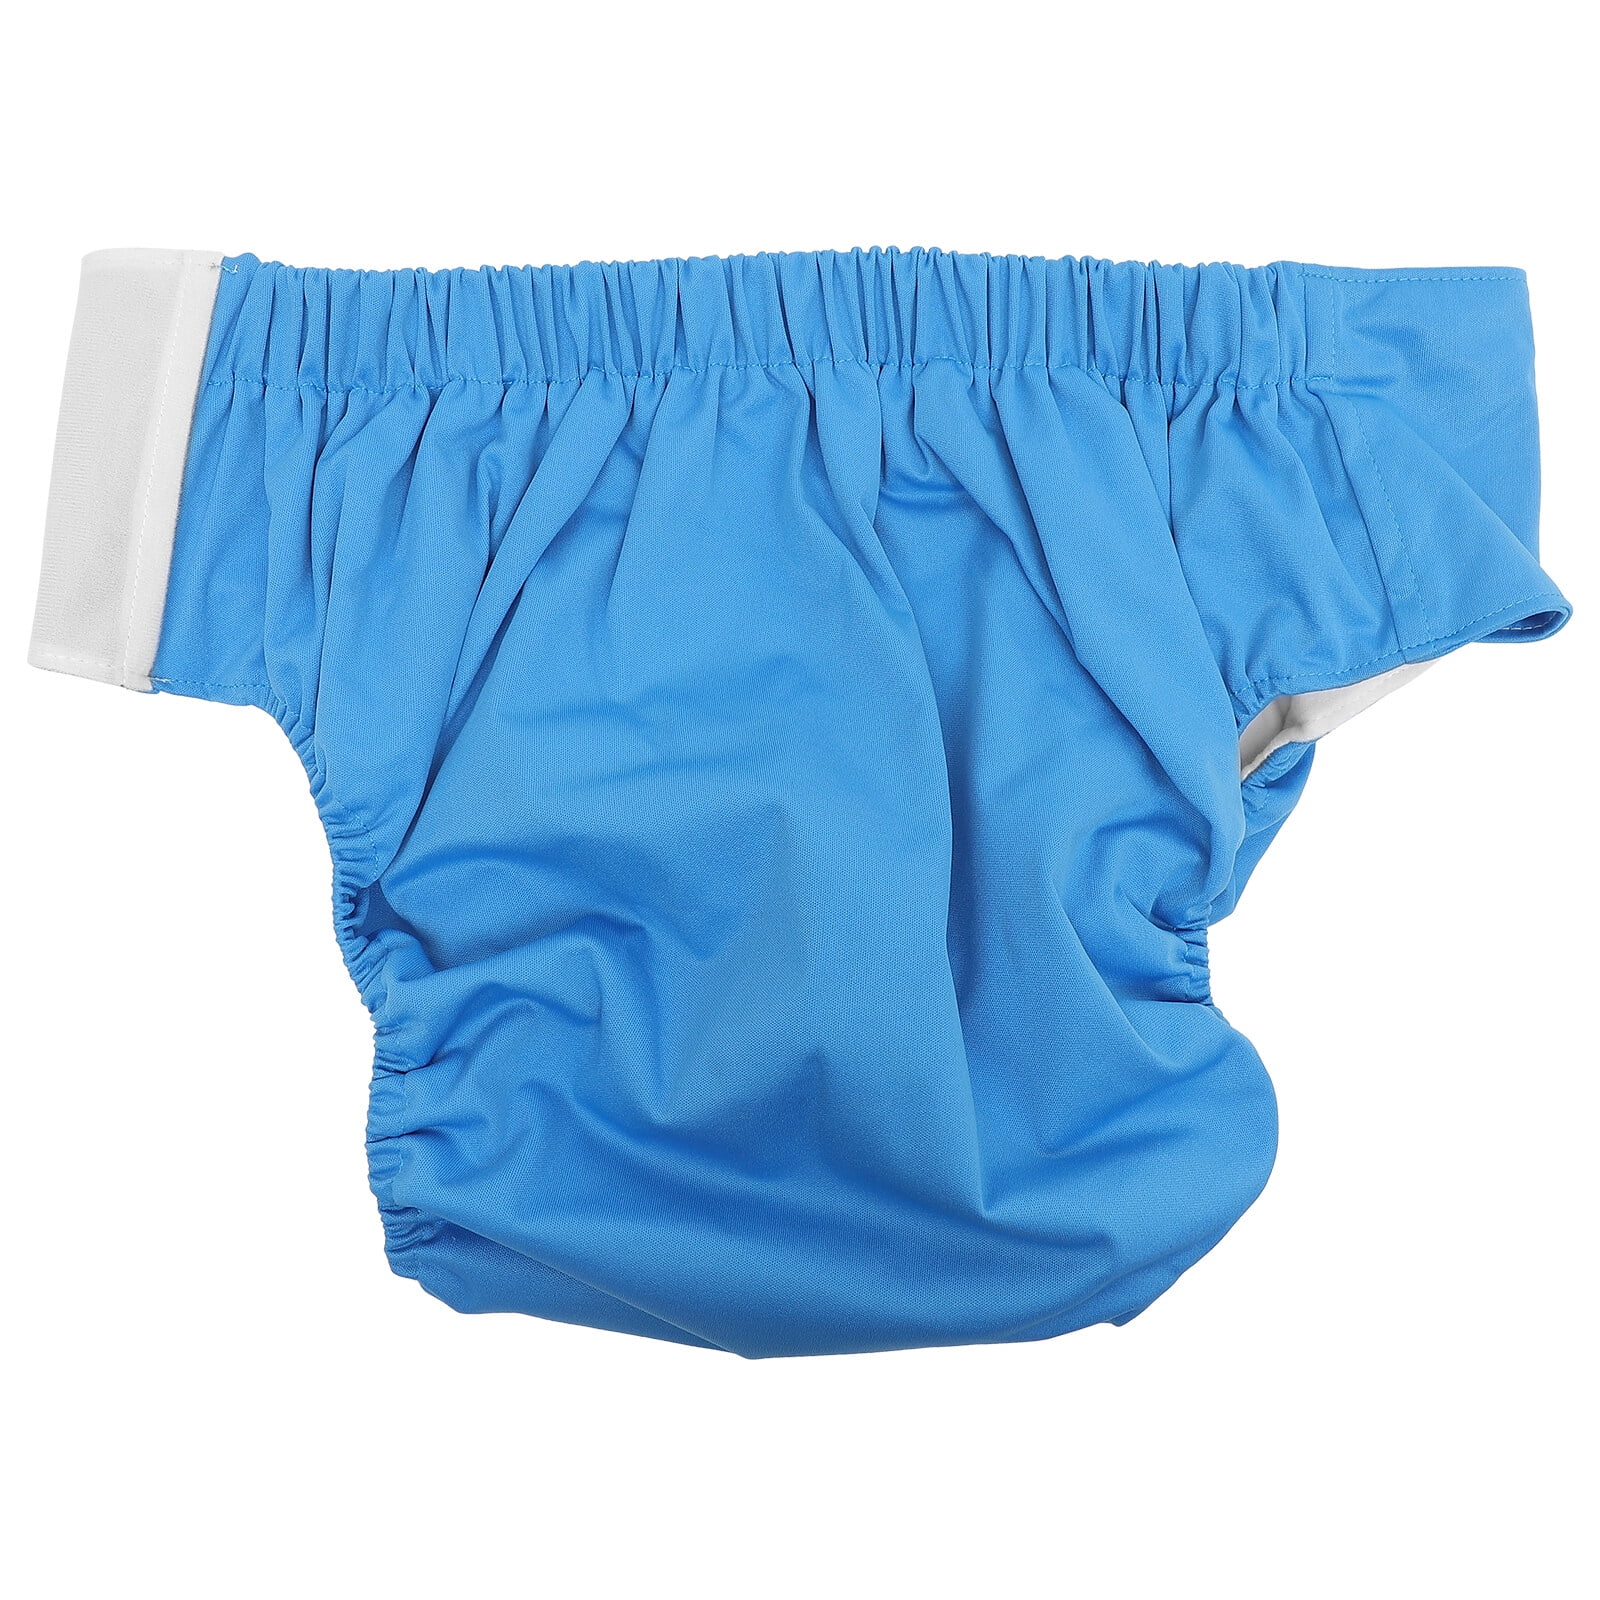 Baade Plastic Pants Adults,Patient Adult Diaper Washable Adult Nappy  Anti-leak Period Brief Incontinence Diaper 